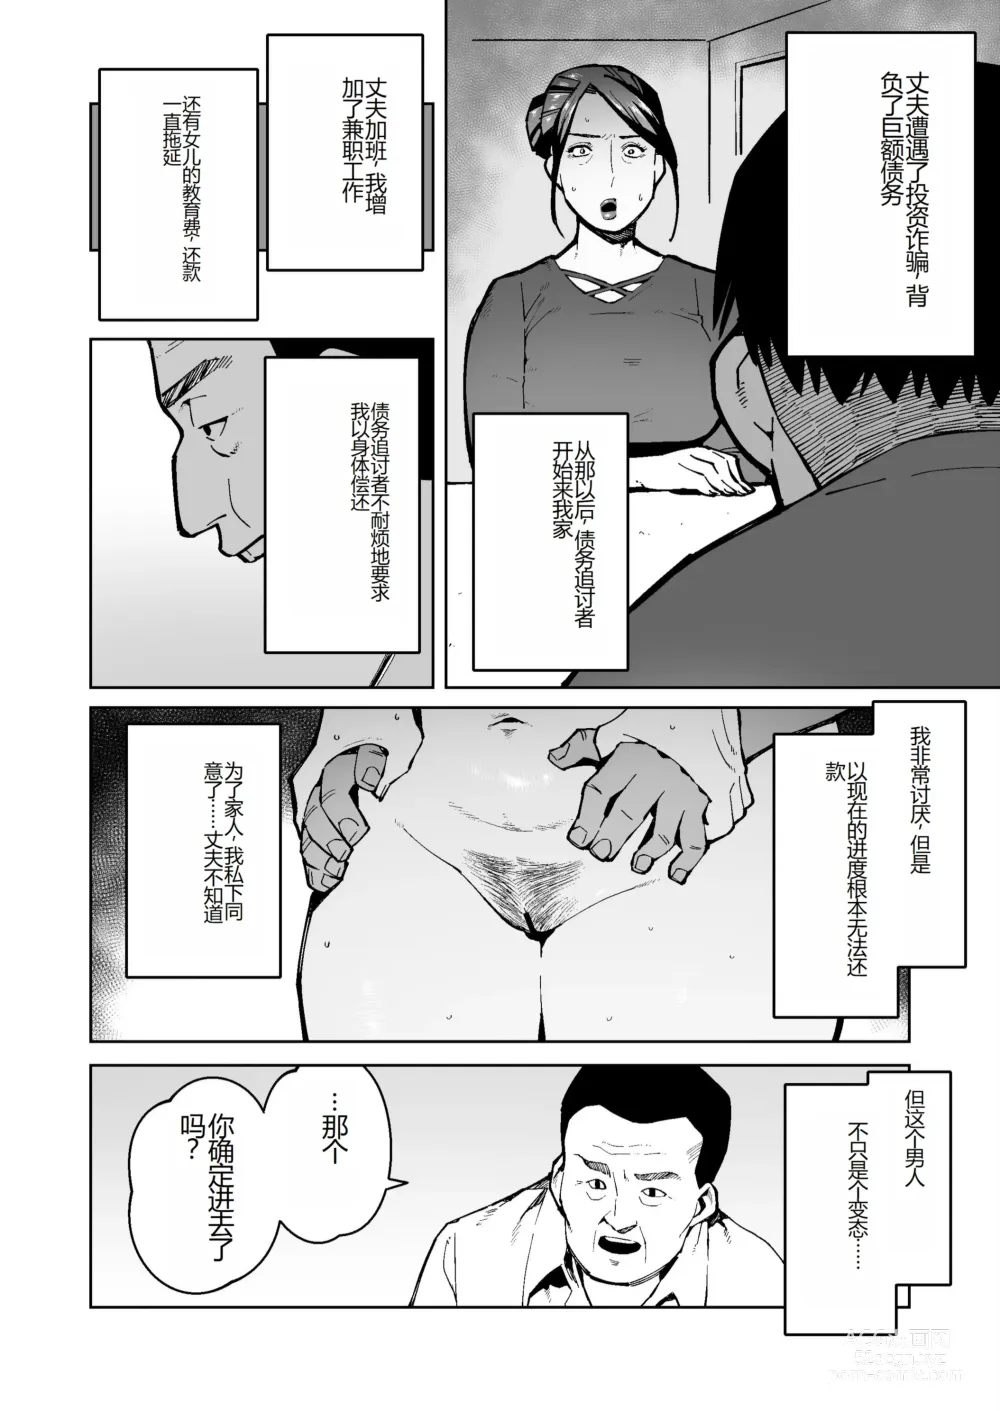 Page 2 of doujinshi A plump mature woman whose anus is expanded and her big pussy is stretched out to repay her debts.